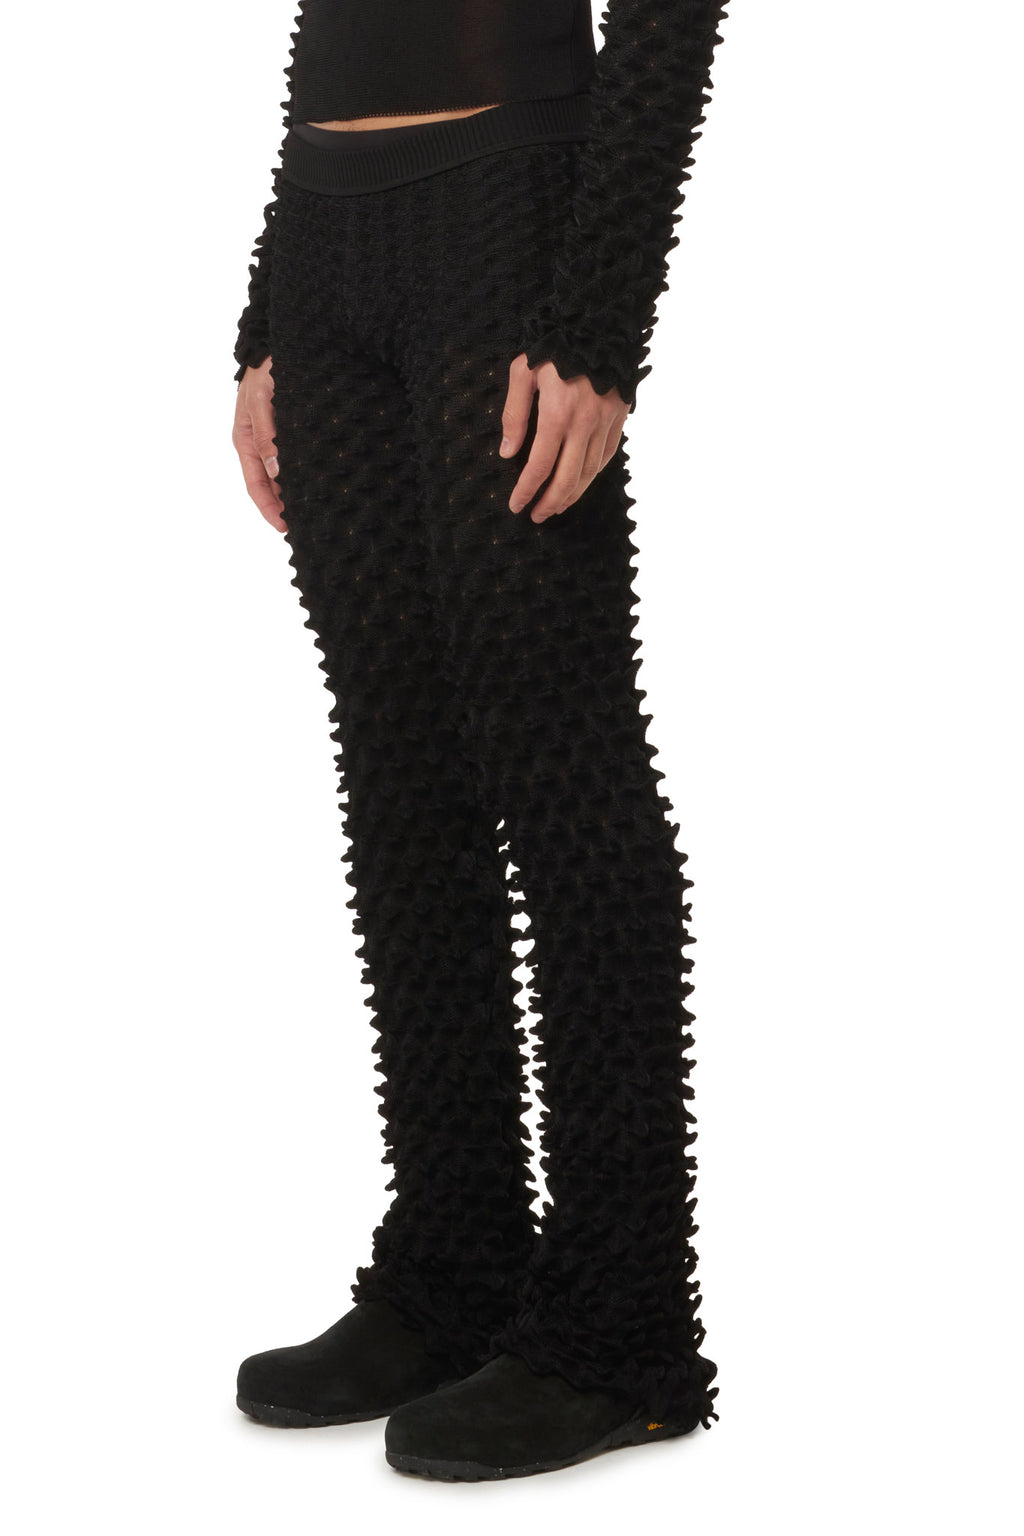 Chet Lo Travelling Spikes Trousers